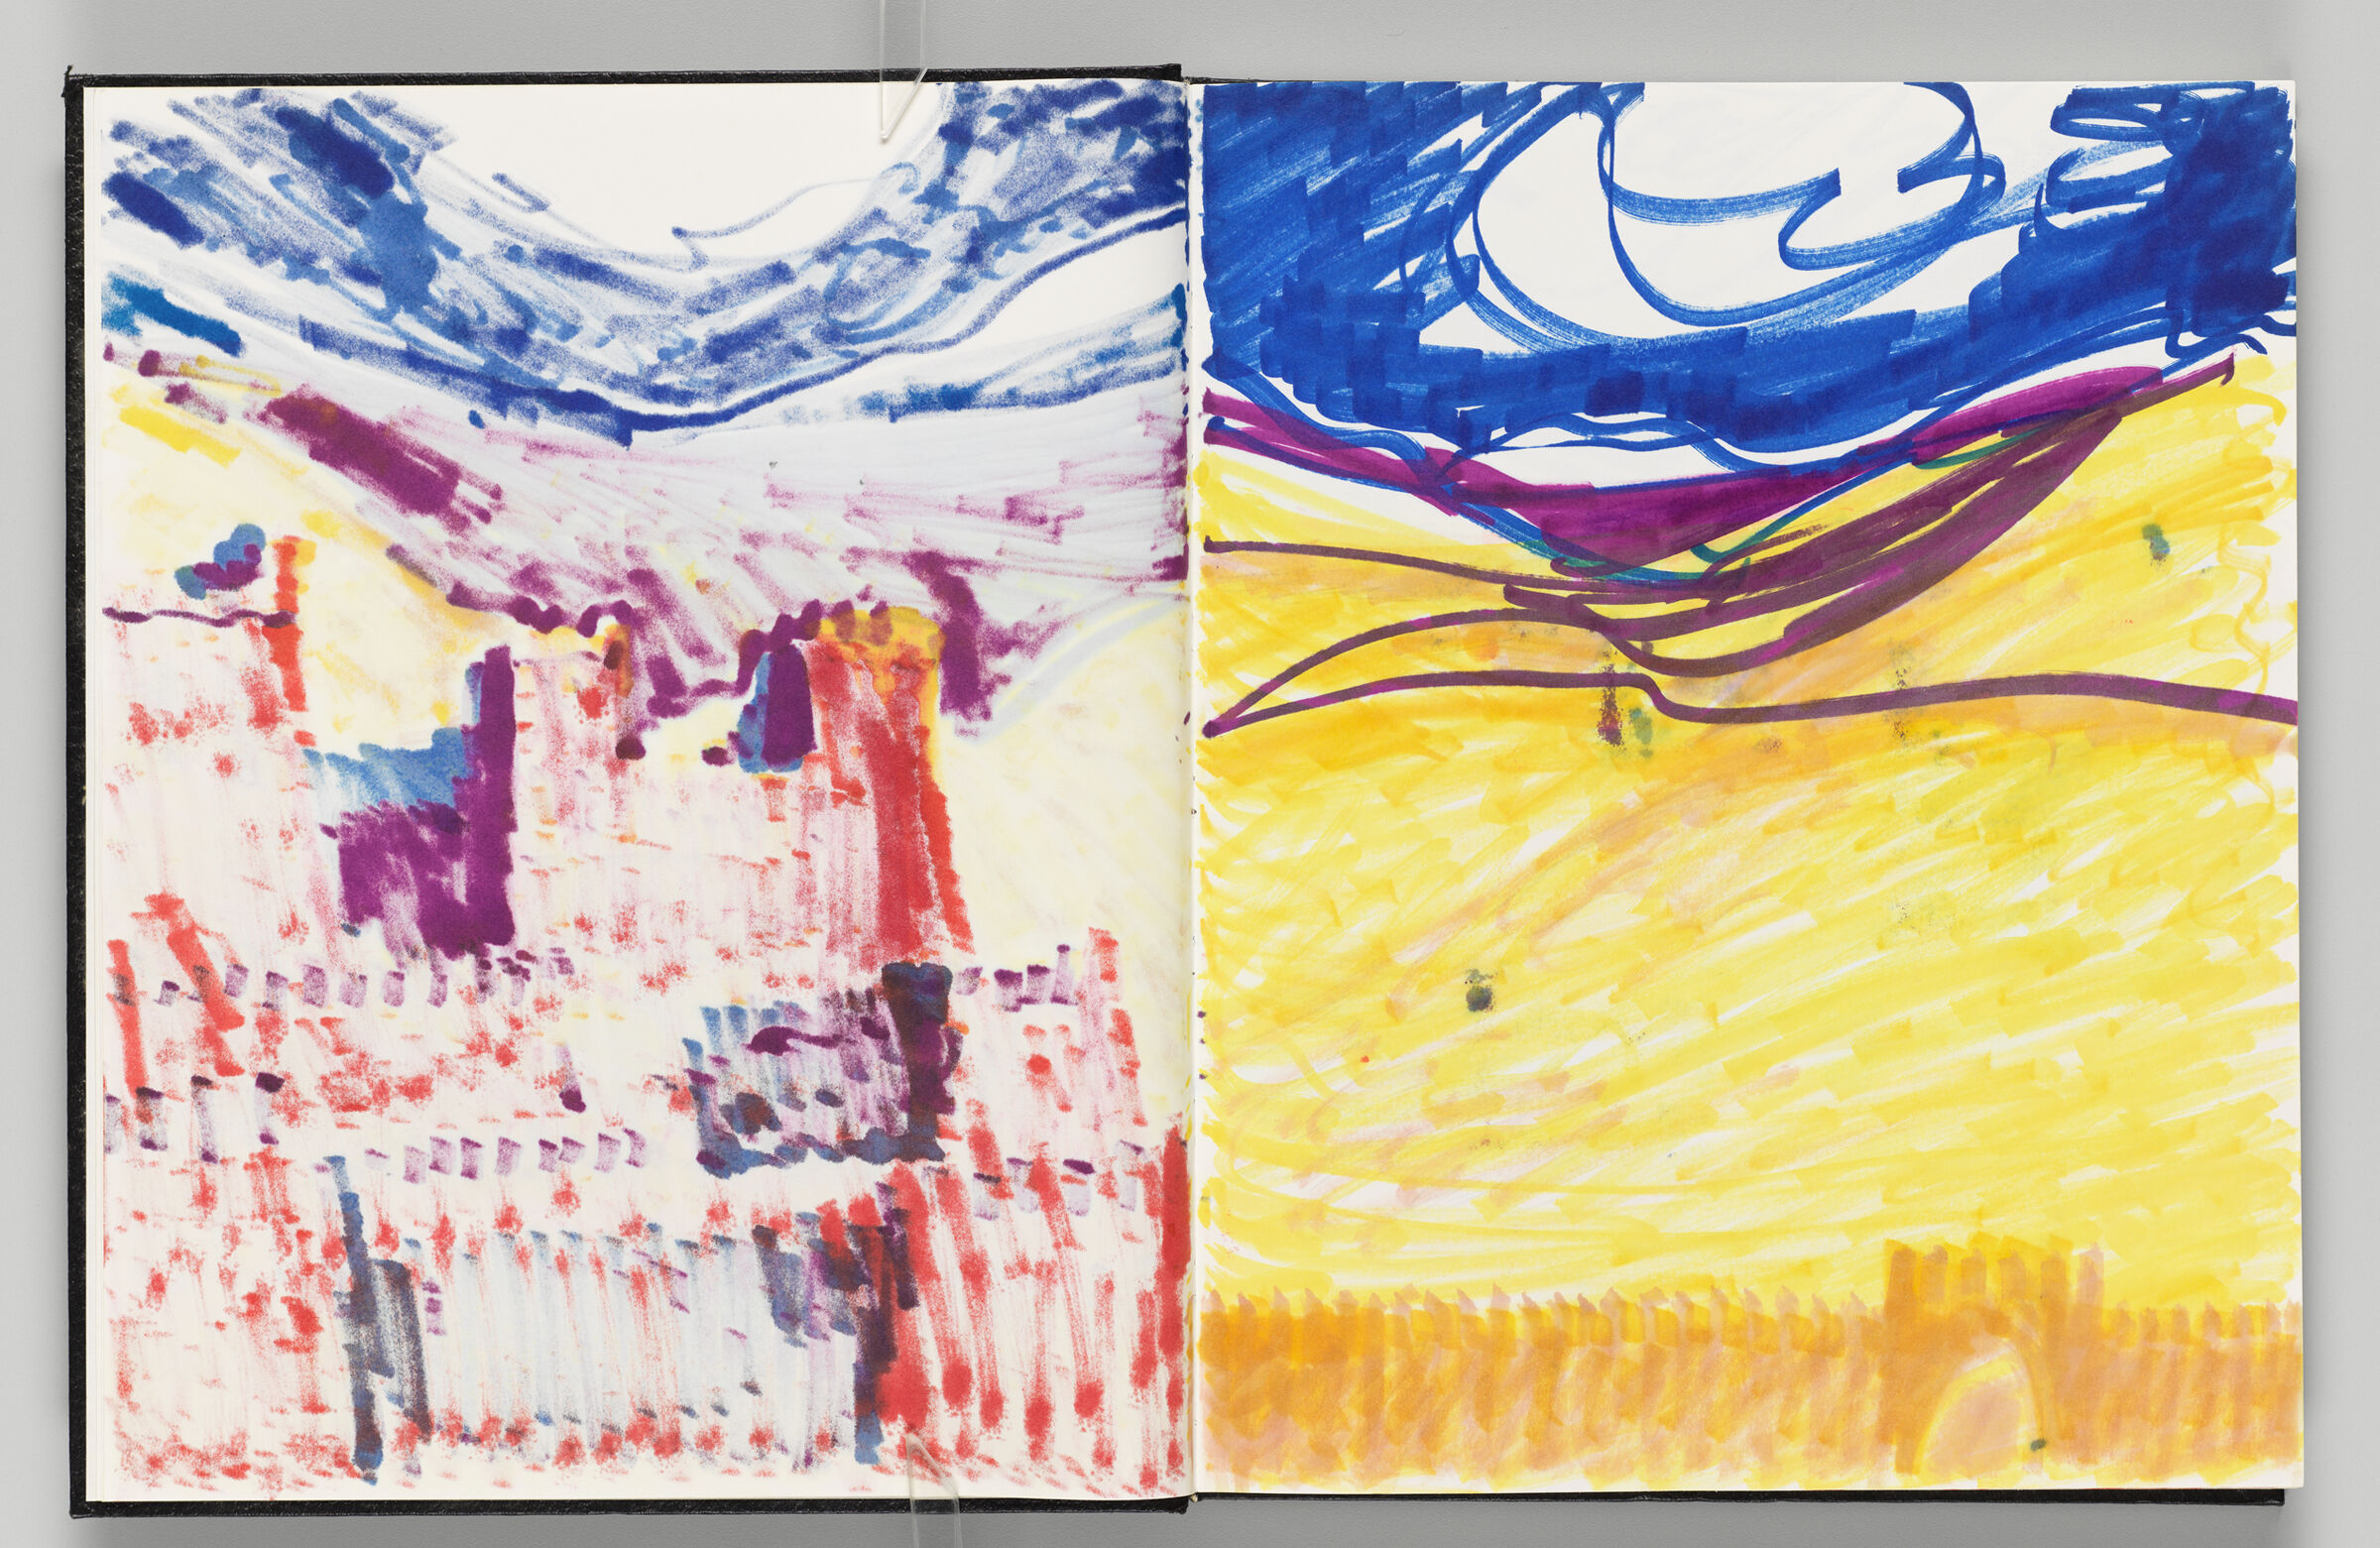 Untitled (Bleed-Through Of Previous Page, Left Page); Untitled (View Of Ouarzazate Desert, Right Page)